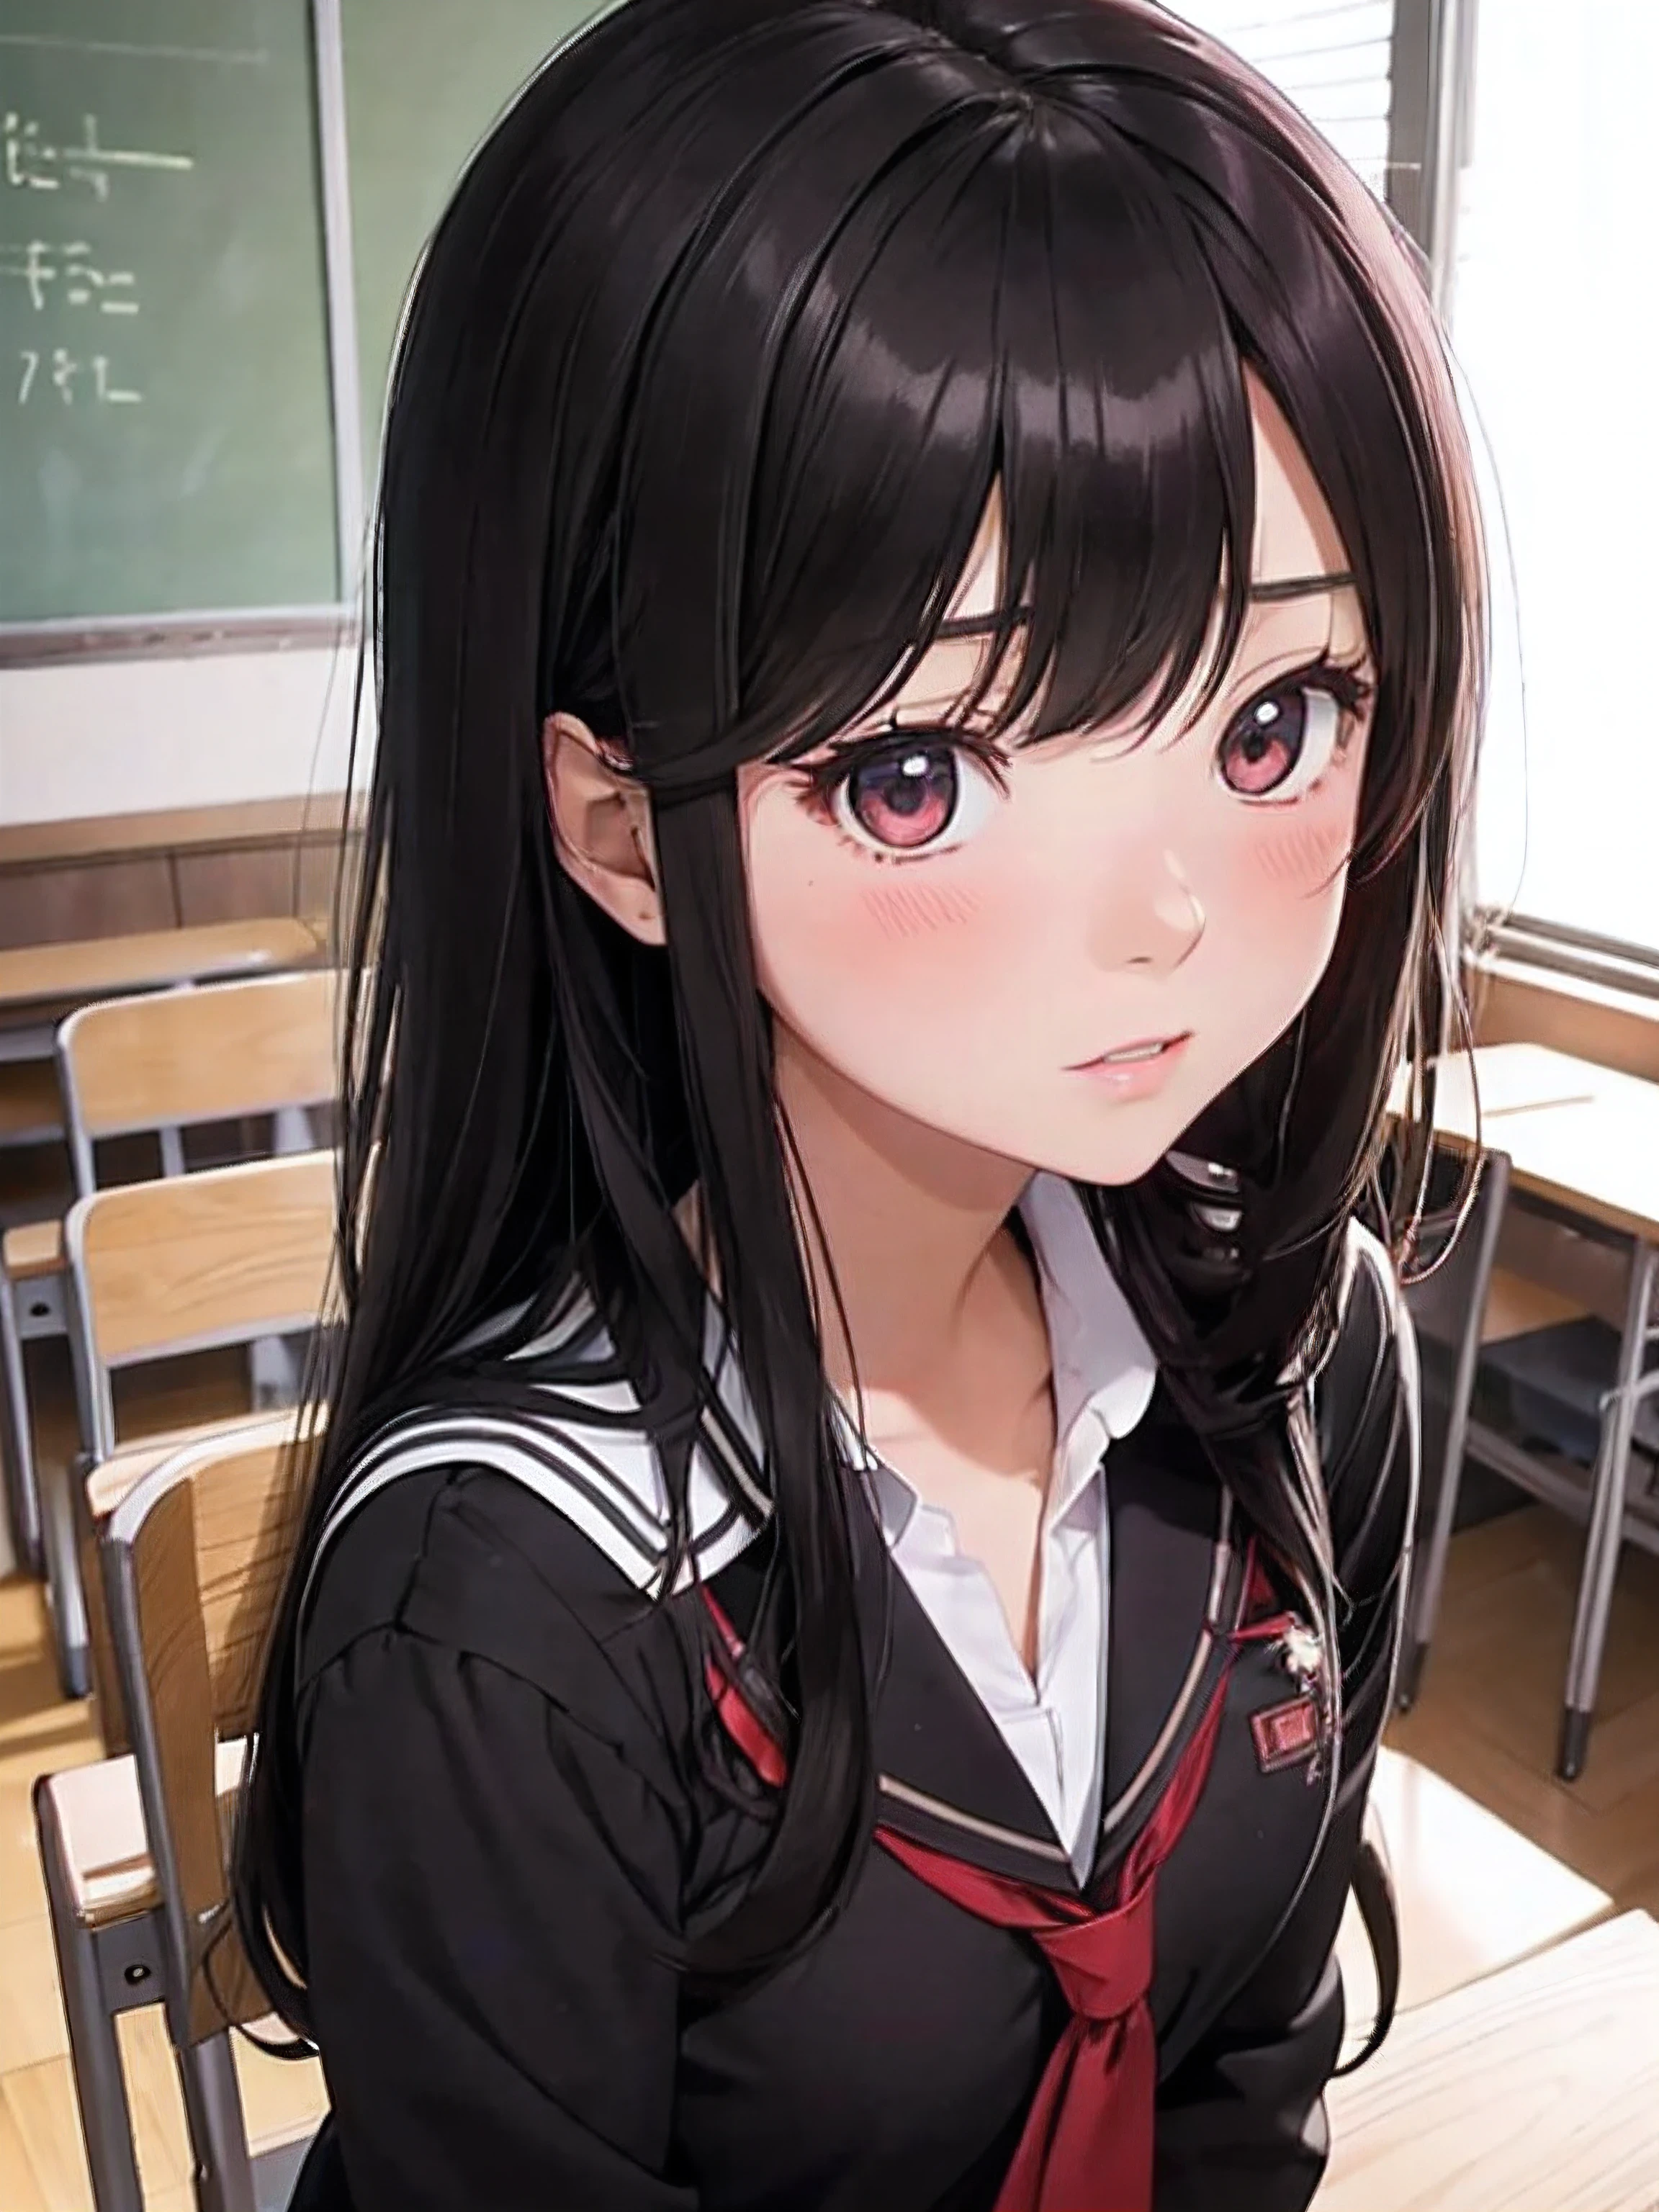 Pin by hinlace chan on Classroom of the Elite | Anime character names, Anime  girl with black hair, Anime classroom